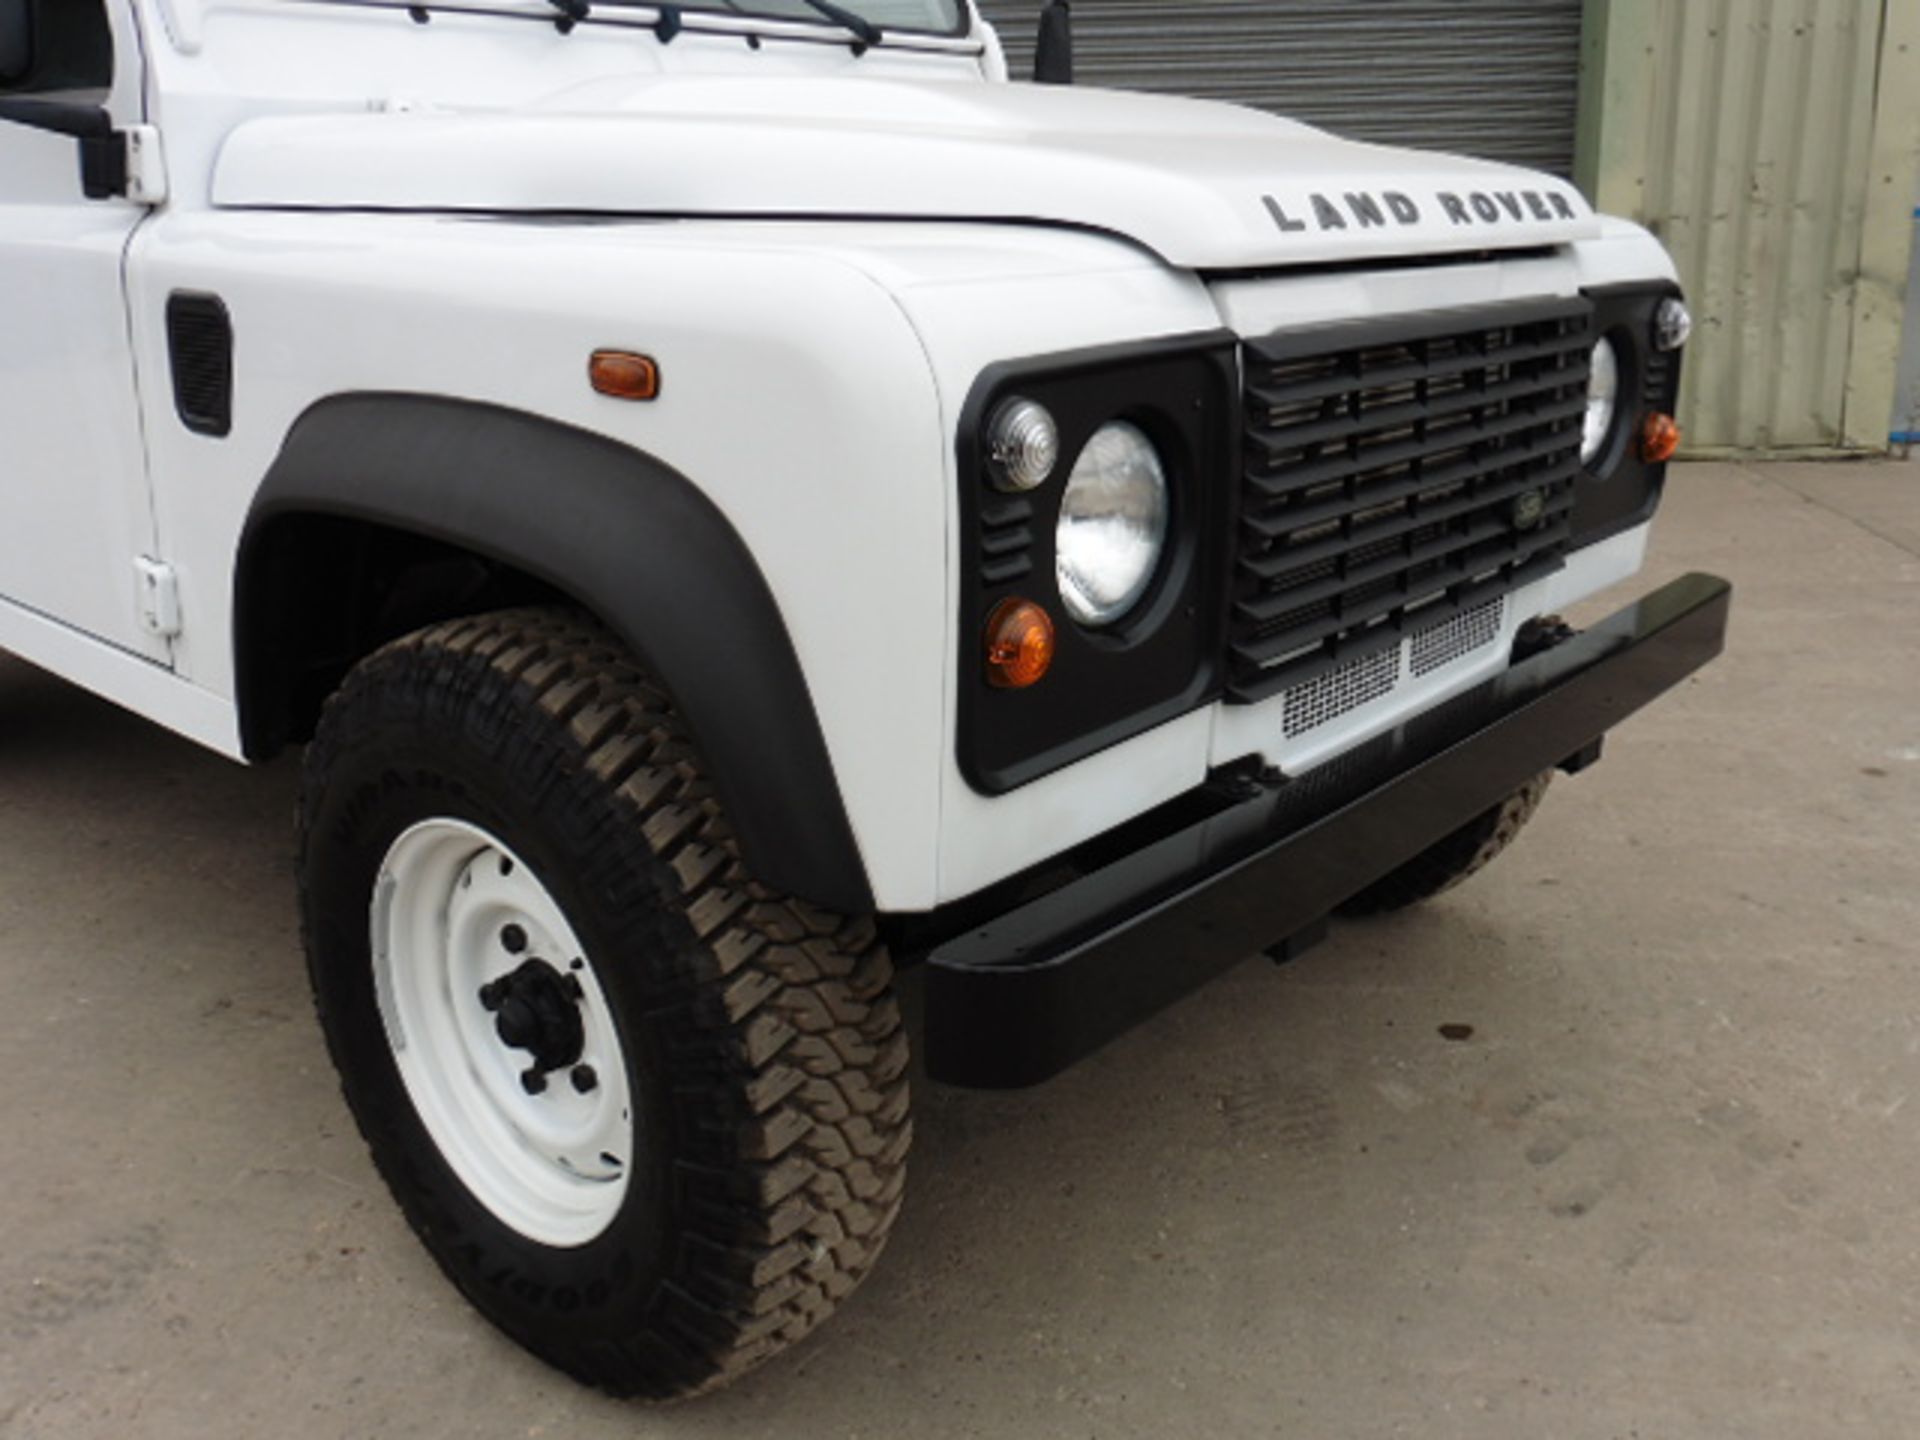 Delivery Mileage 2013 model year Land Rover Defender 110 5 door station wagon LHD - Image 6 of 20